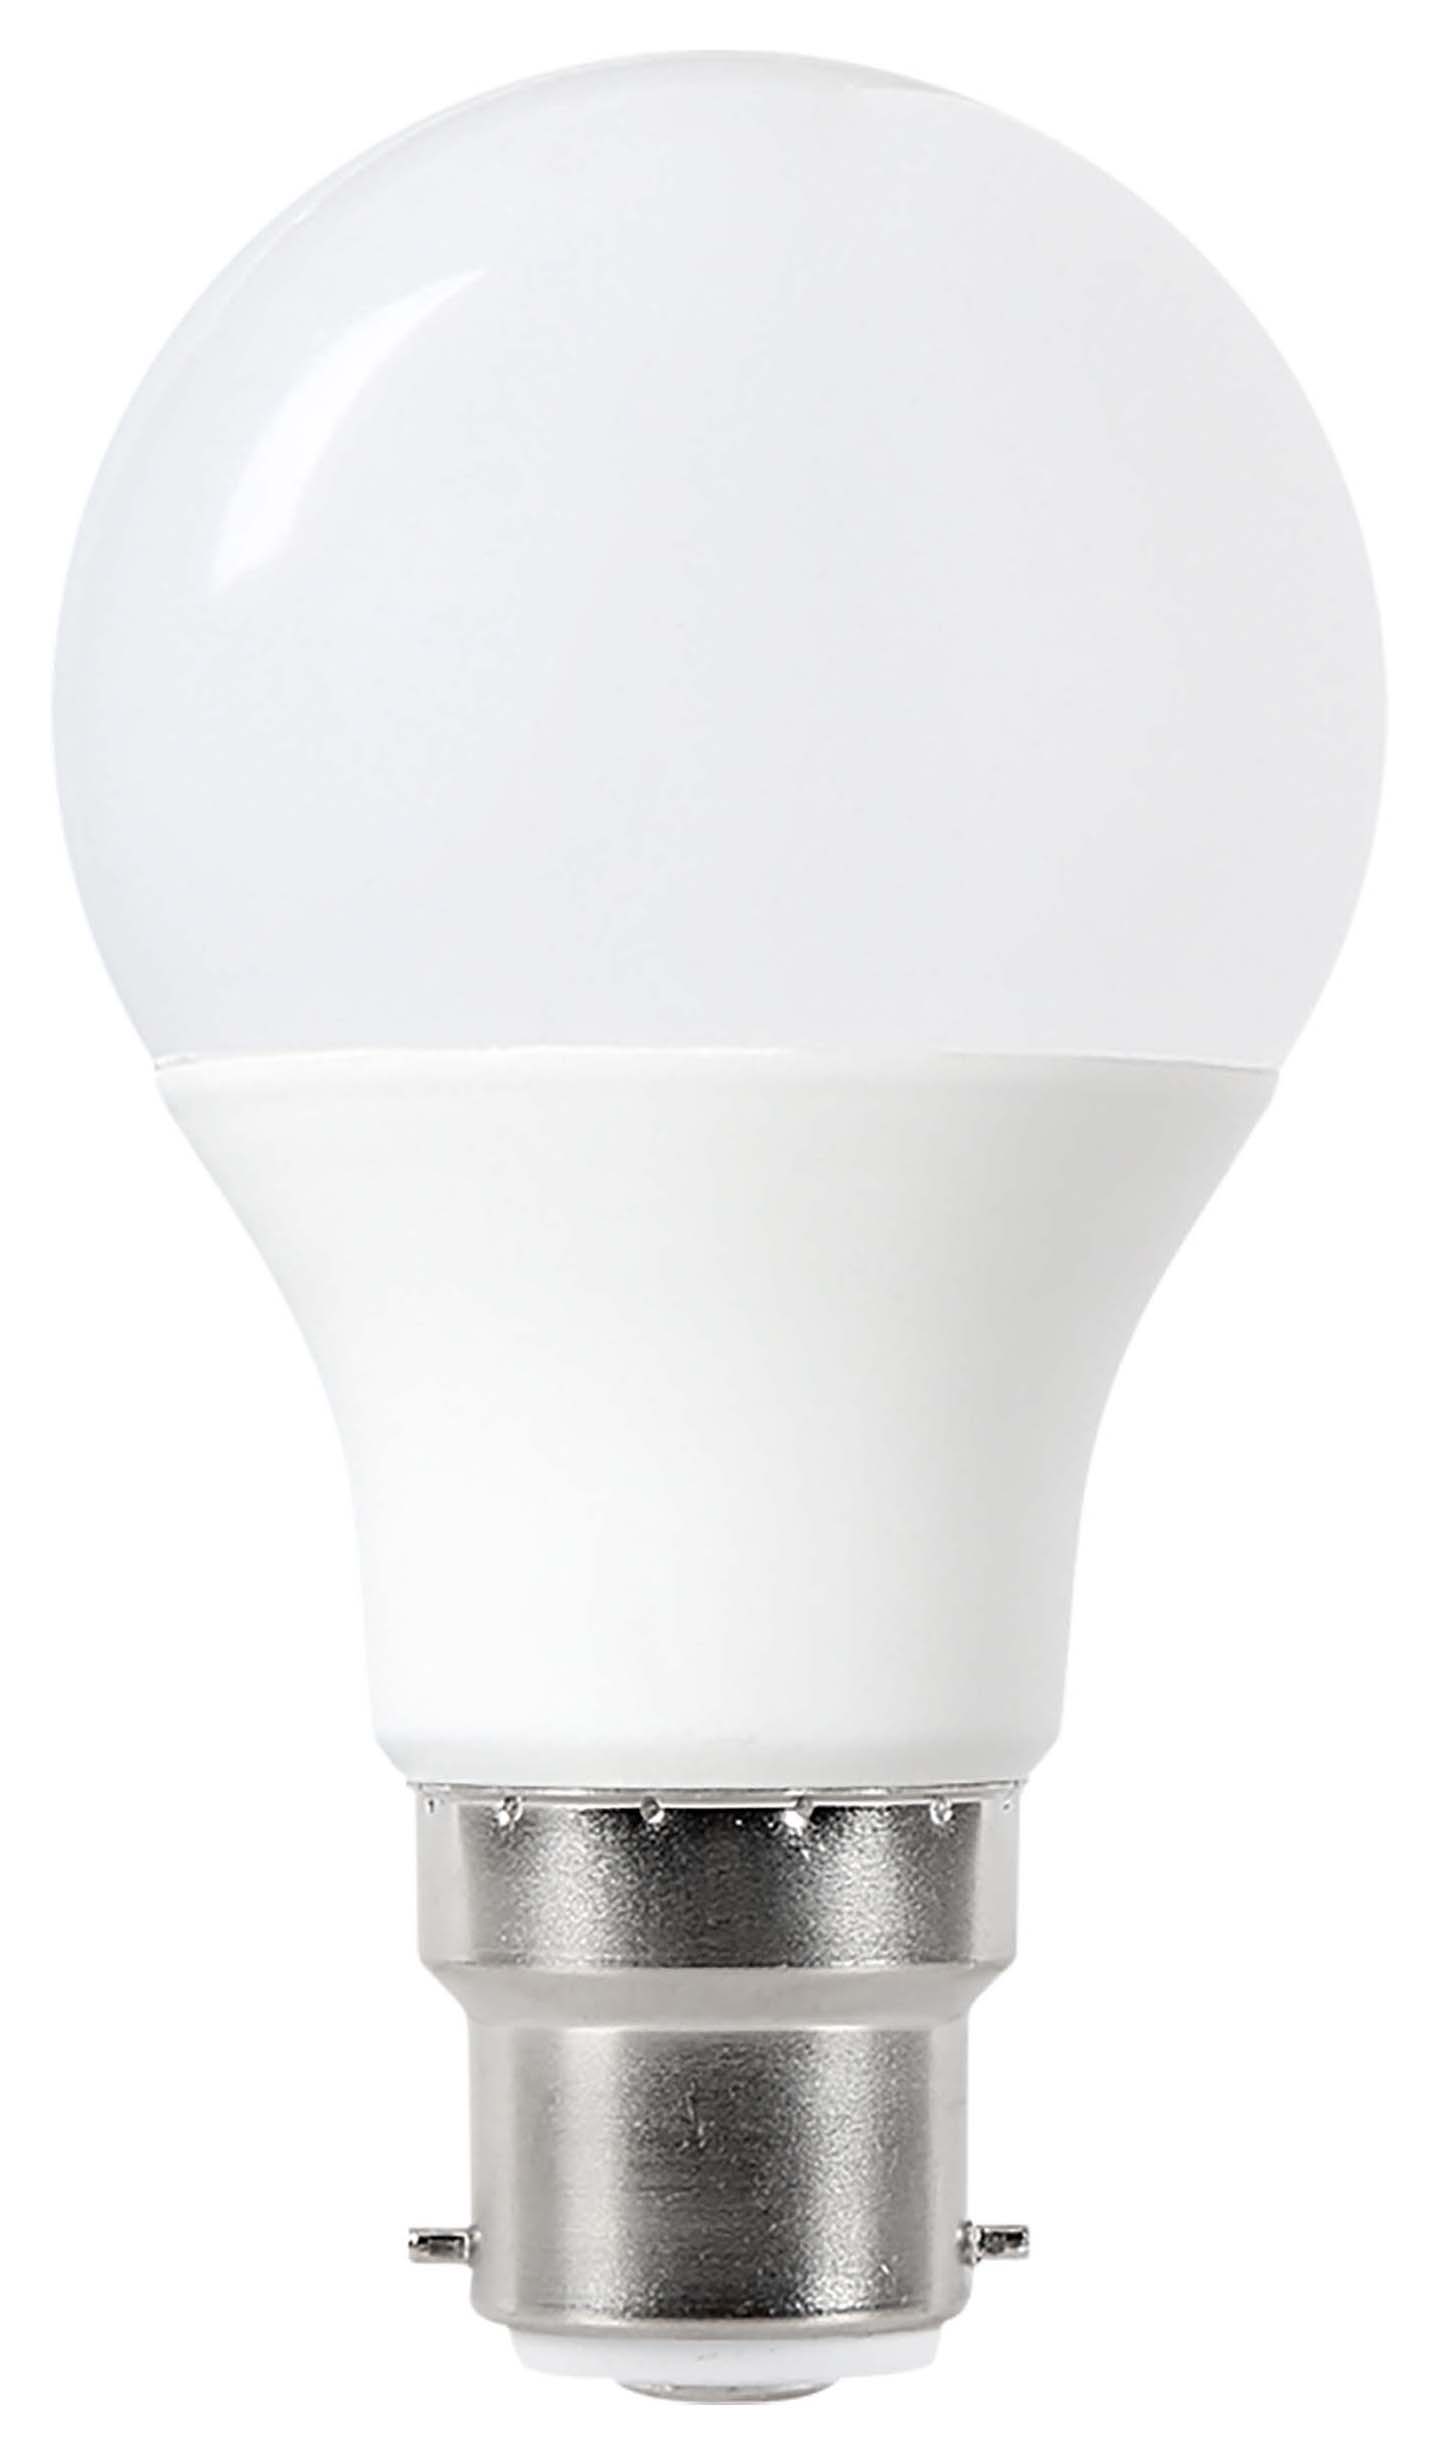 Image of Wickes Non-Dimmable GLS Opal LED B22 8.8W Cool White Light Bulb